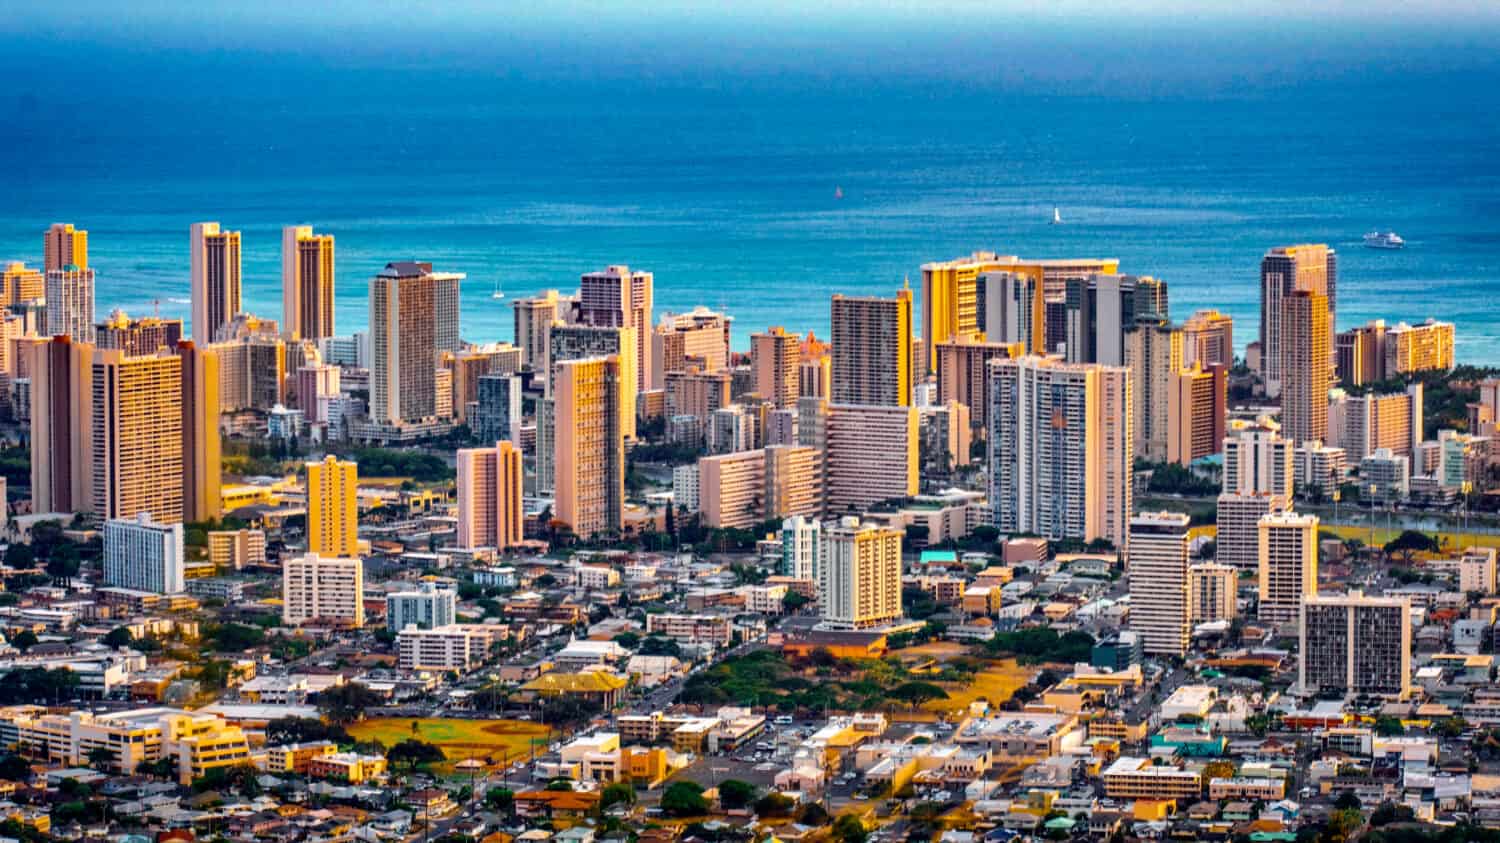 Cityscape of Honolulu city and  Waikiki beach with blue ocean and light reflection from sunset sky to buildings from Ualaka’a lookout on Tantalus mountain  in Honolulu, Oahu, Hawaii USA